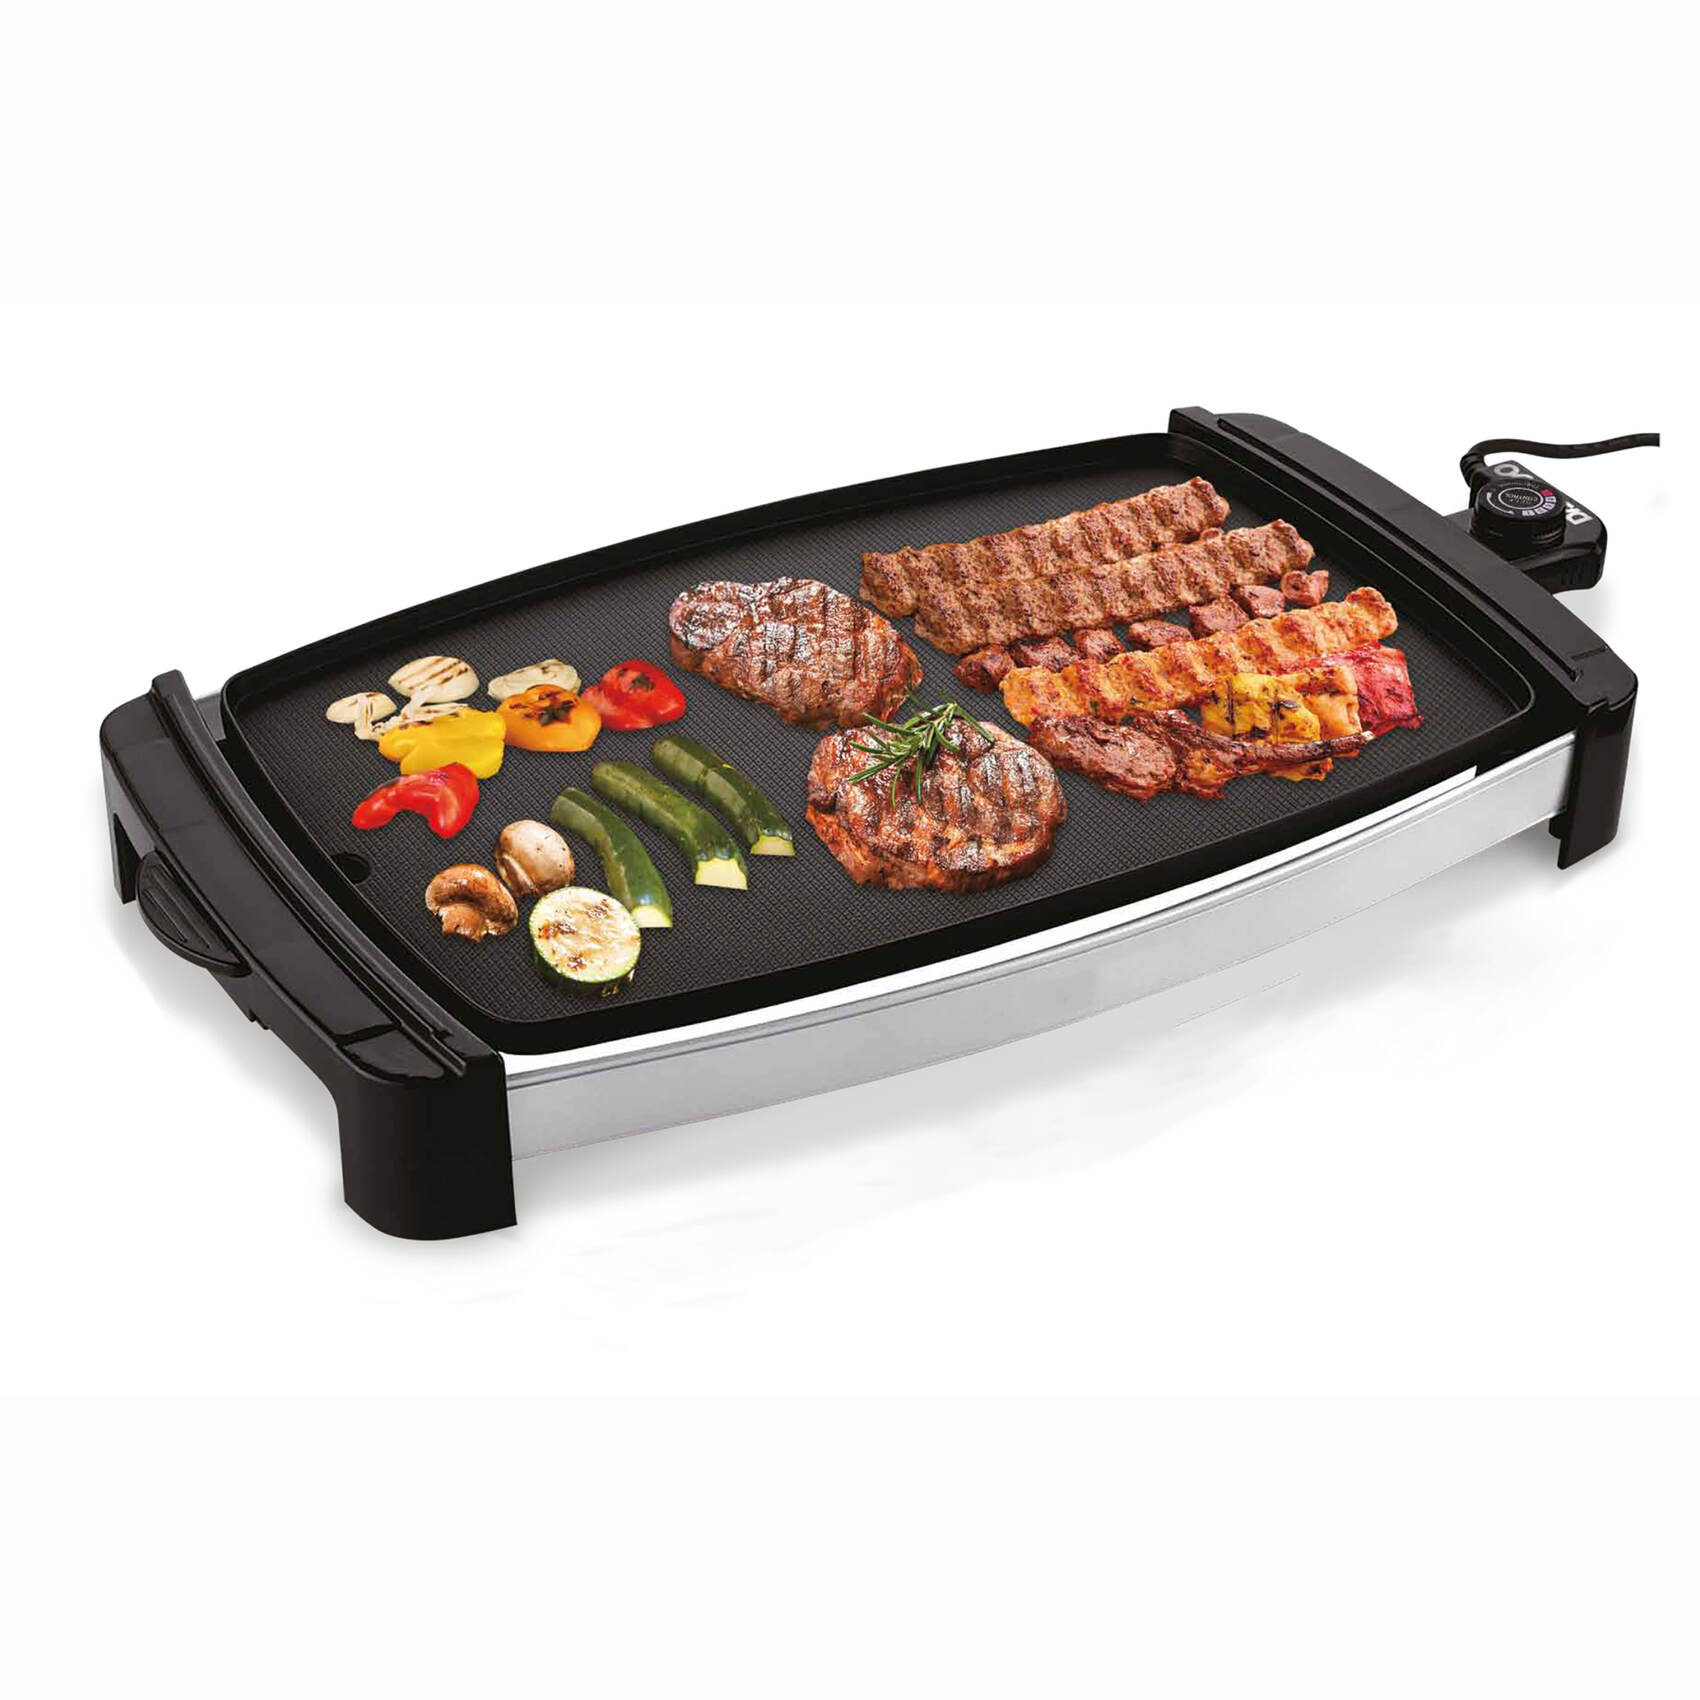 NAMSON MULTIPURPOSE ELECTRIC GRILL PAN 2000W NA-7817 WITH ADJUSTABLE TEMPERATURE CONTROLL AND COOL TOUCH HANDLE |NON-STICK COATED | REMOVABLE OIL TRAY